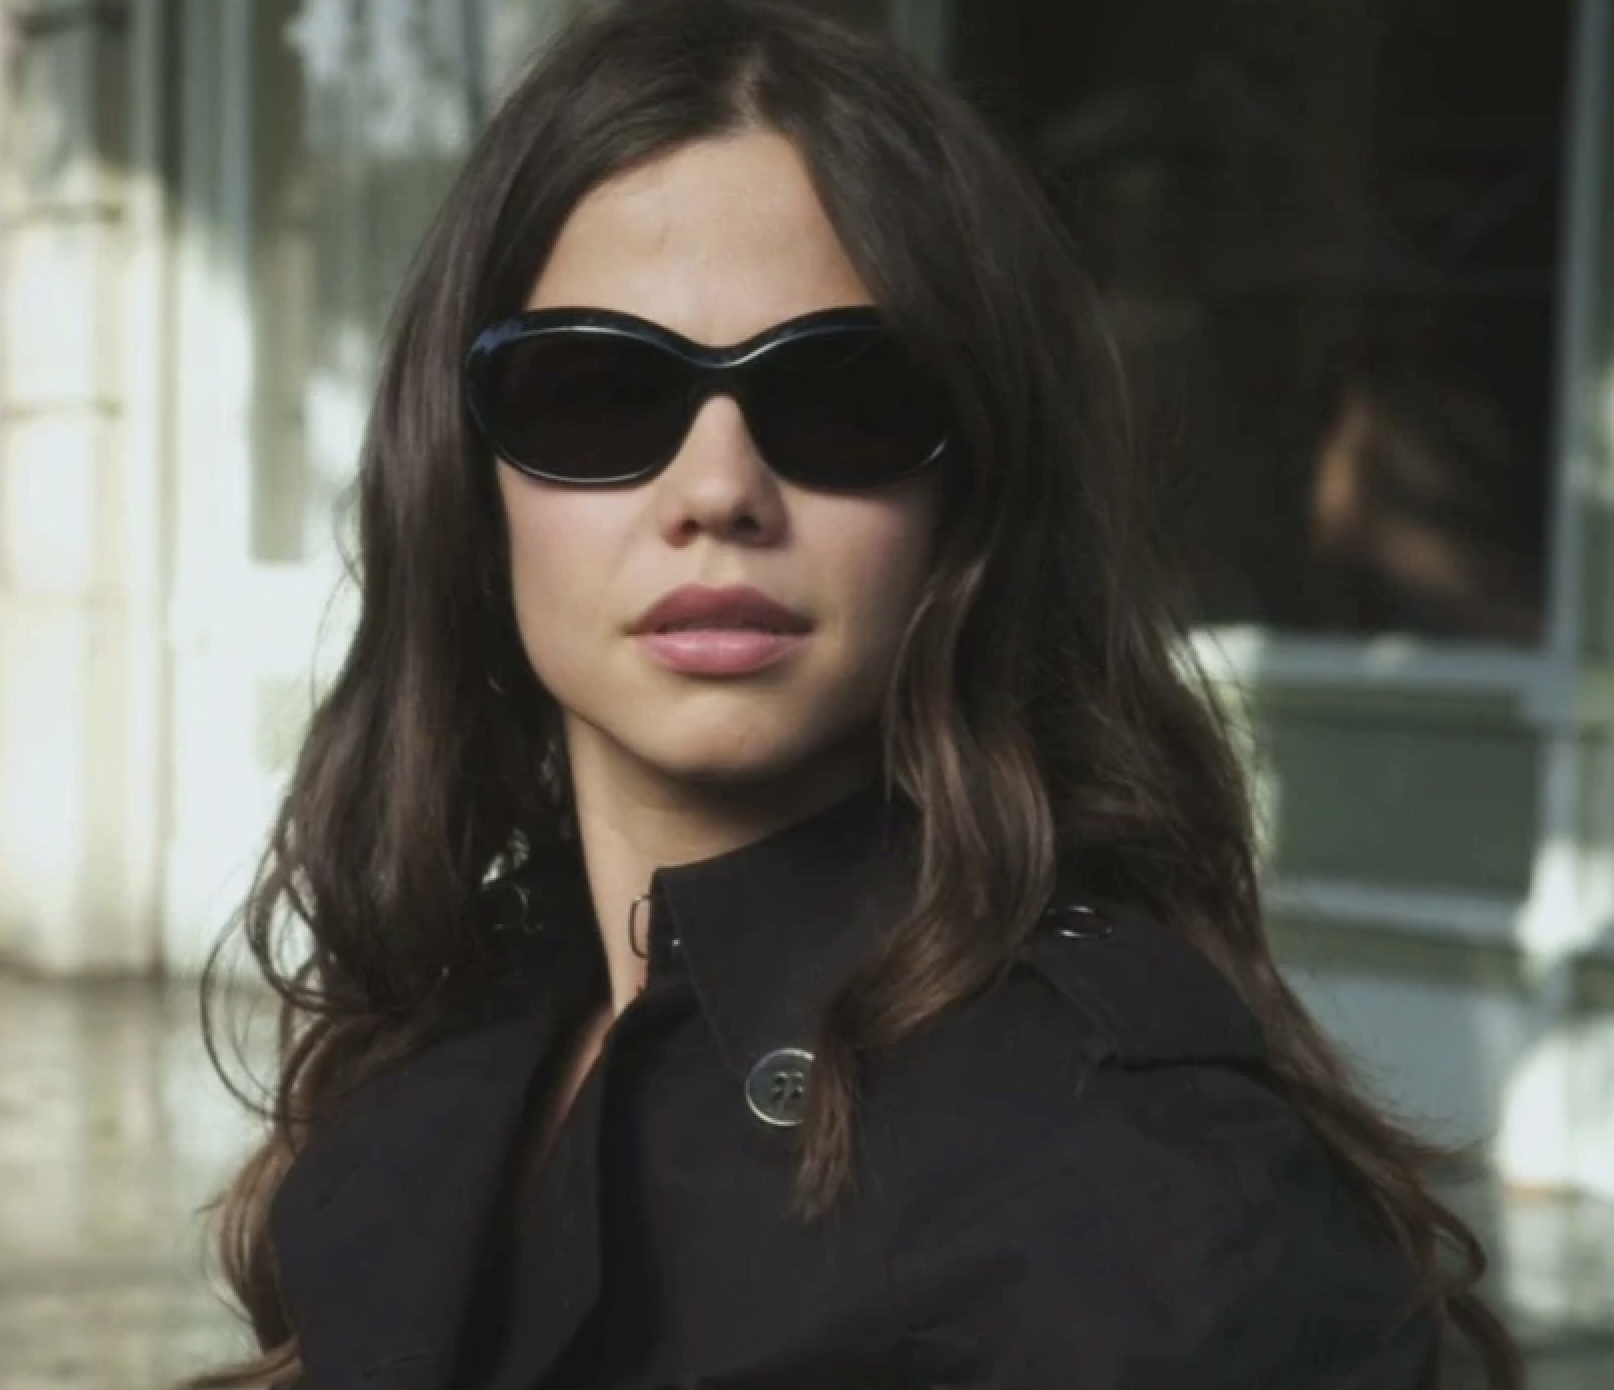 Tammin Sursok, who has dark brown hair and is wearing sunglasses